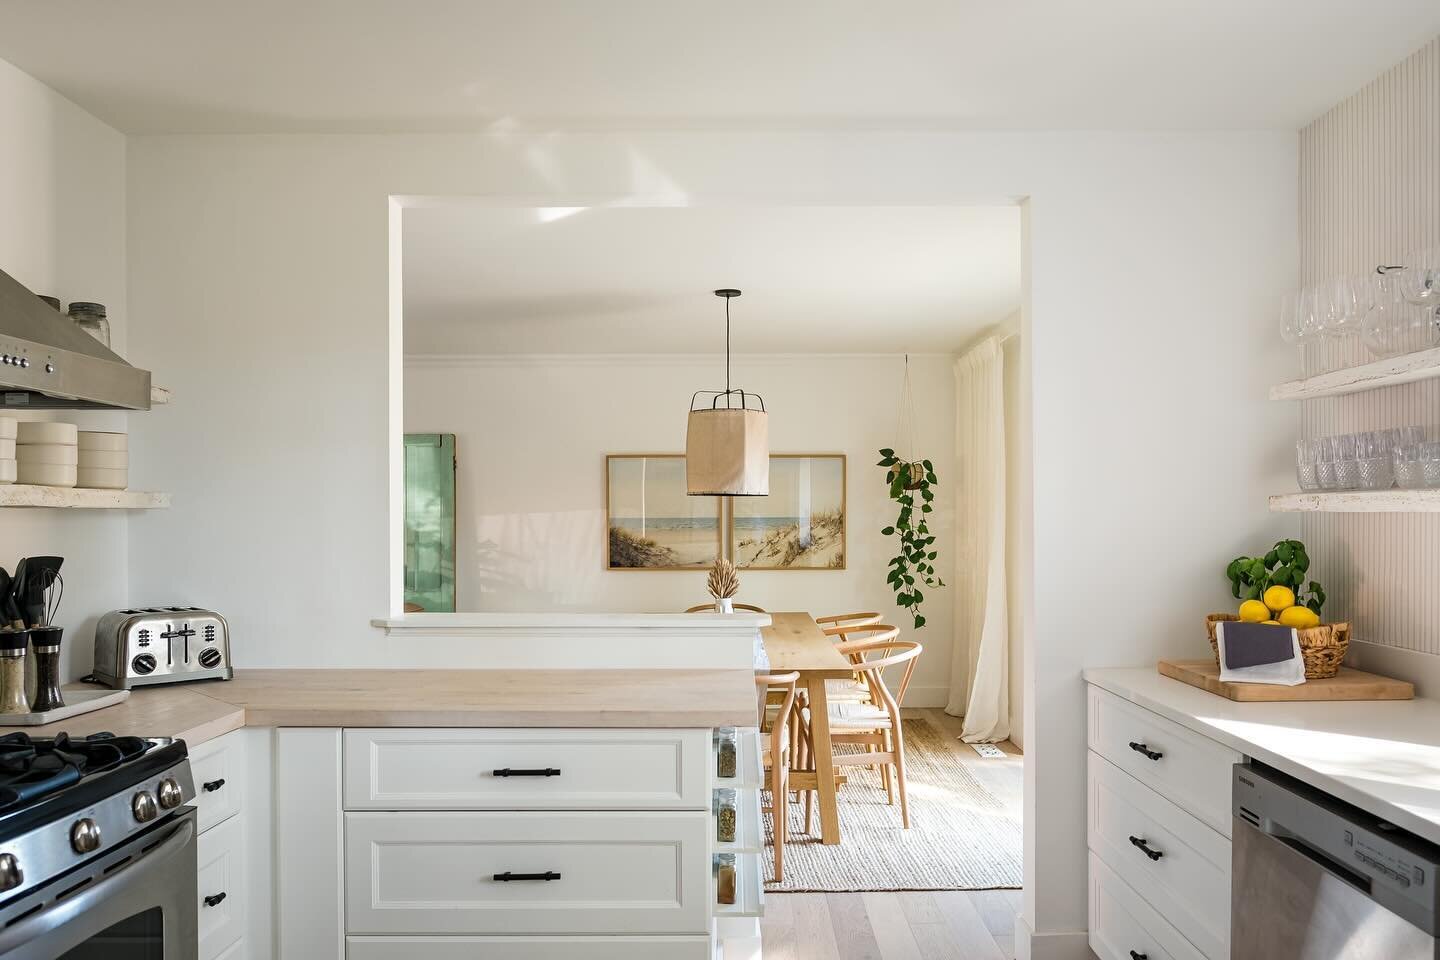 looking to take on a few interior projects for the spring.

this is the perfect time to refresh your airbnb / short term accommodation listing to prepare for summer bookings.

you have put your heart and soul into creating a beautiful, inviting space